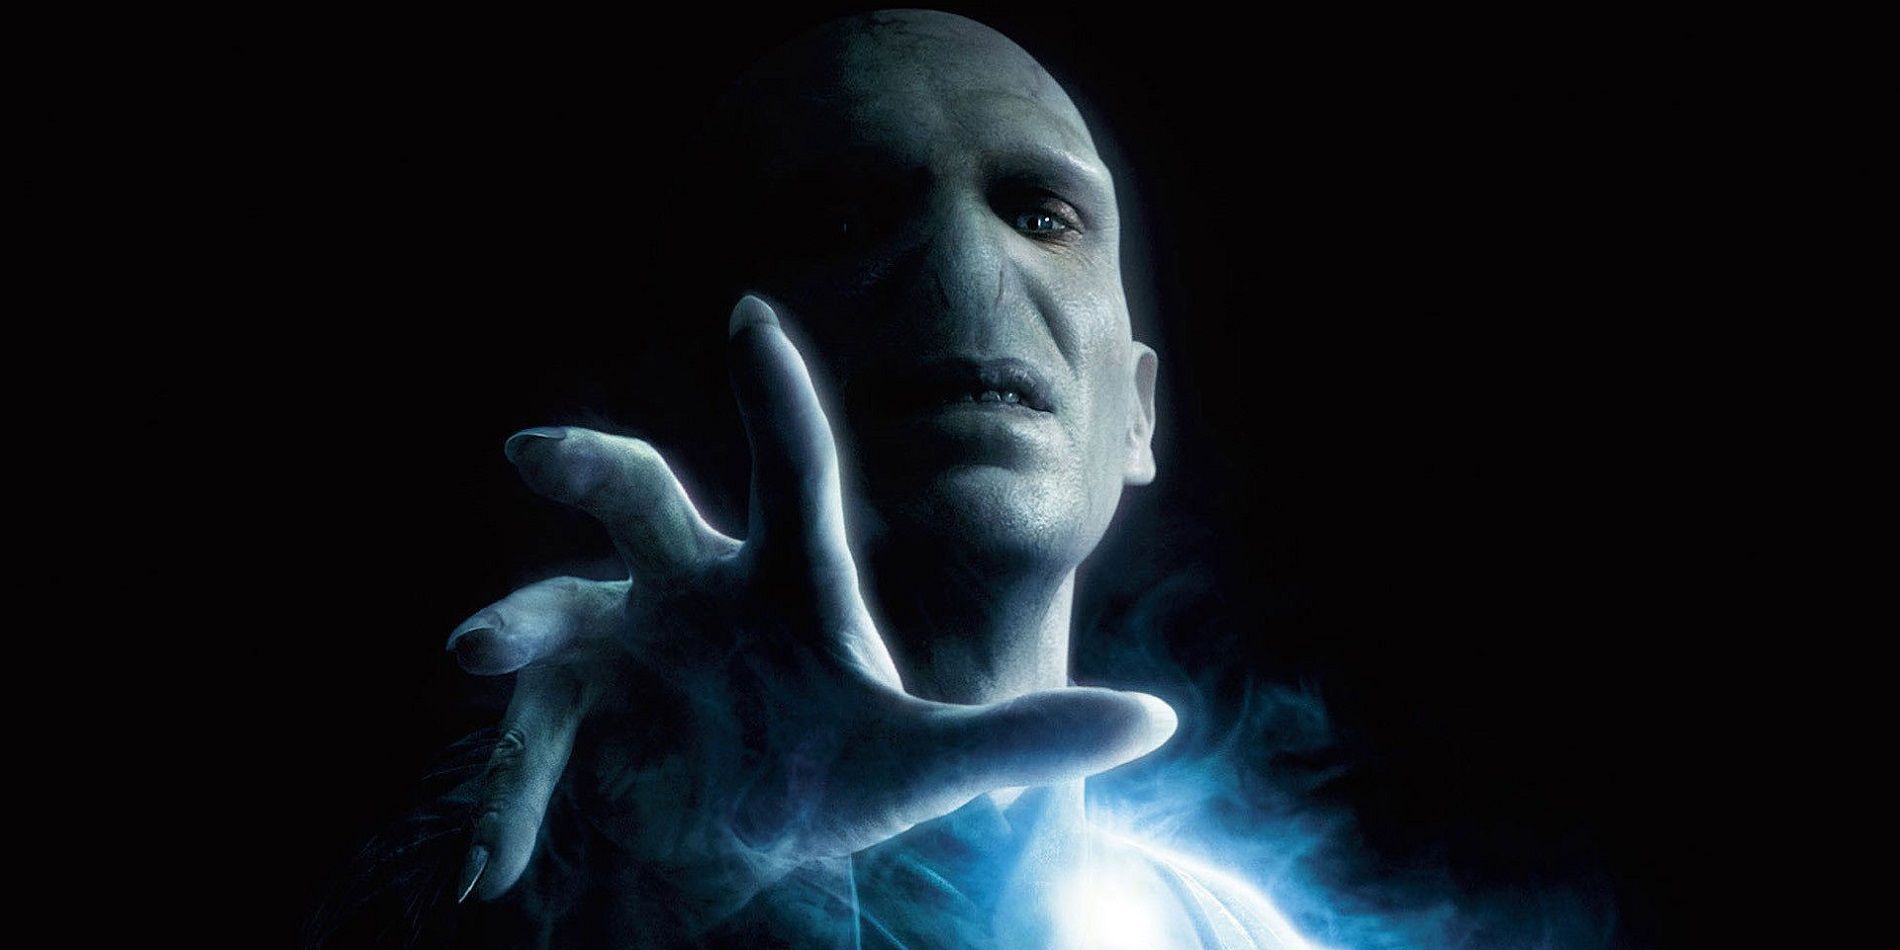 Lord Voldemort from Harry Potter